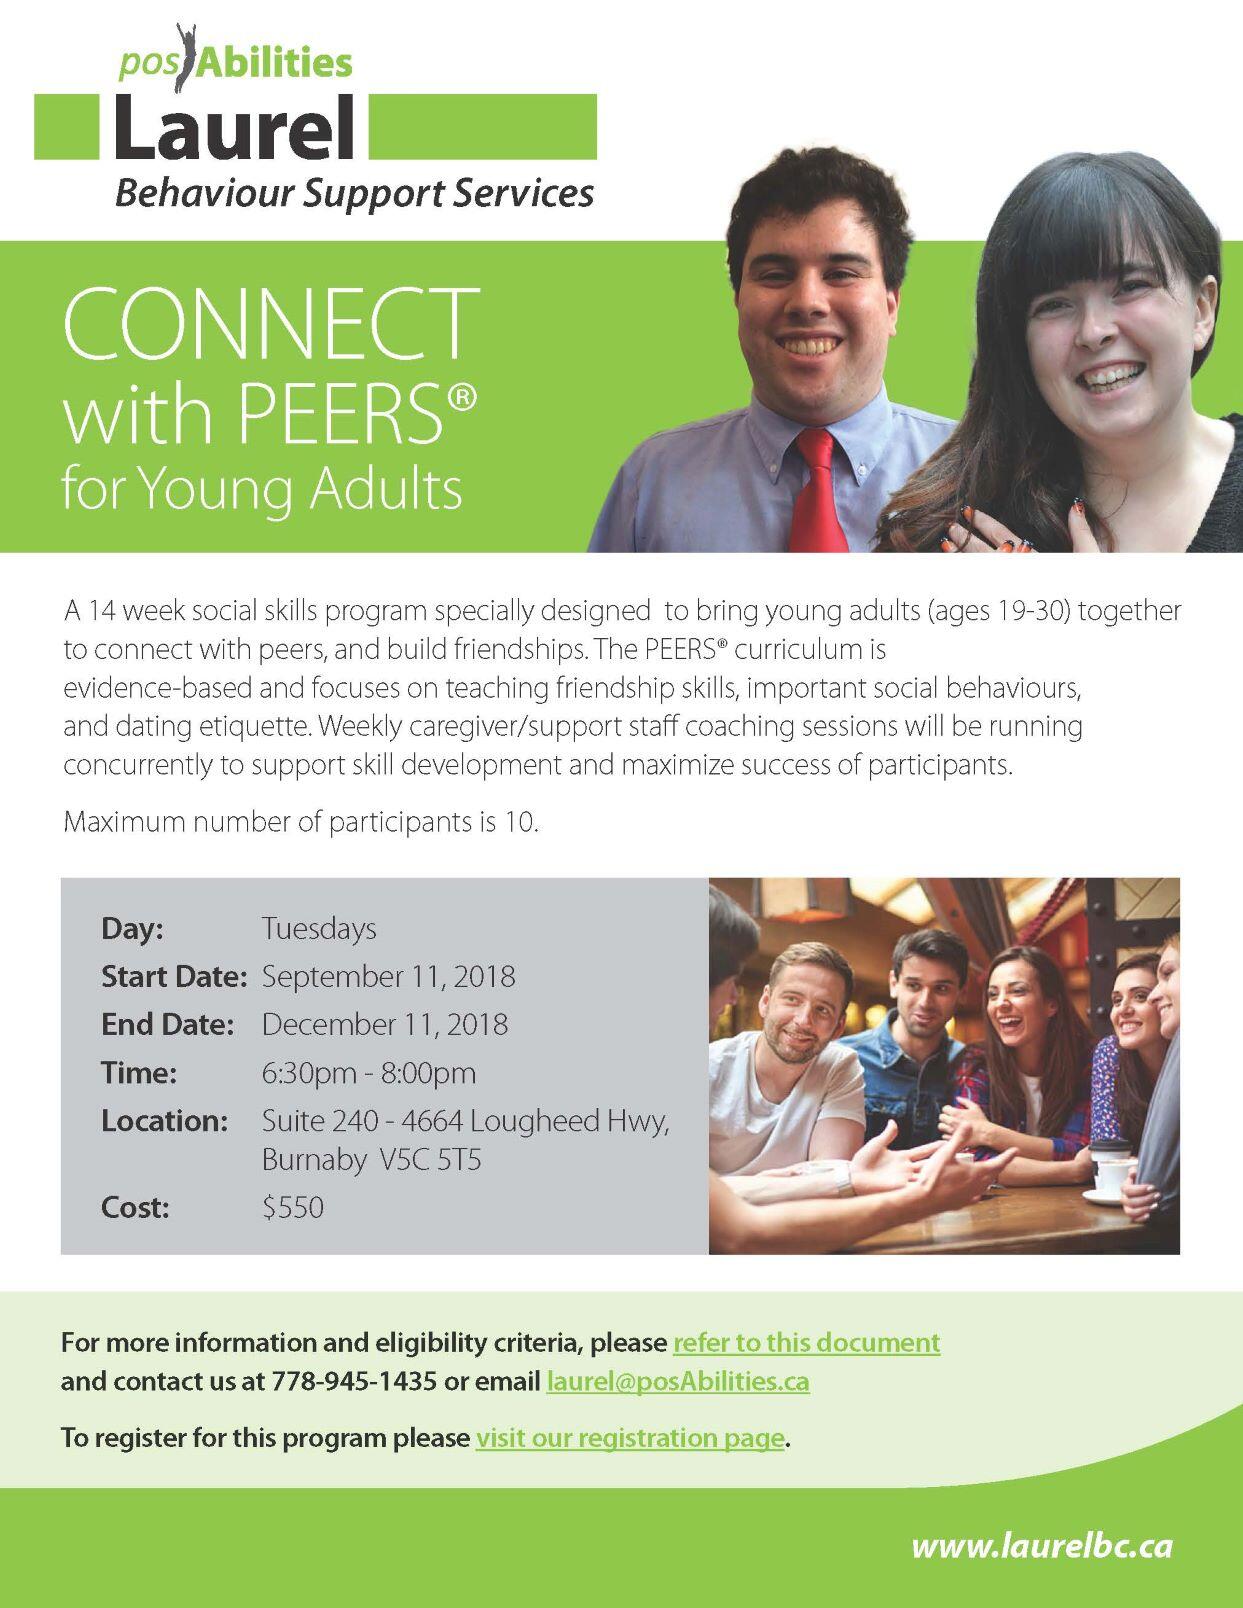 Connect with PEERS(r) for Young Adults (19-30)